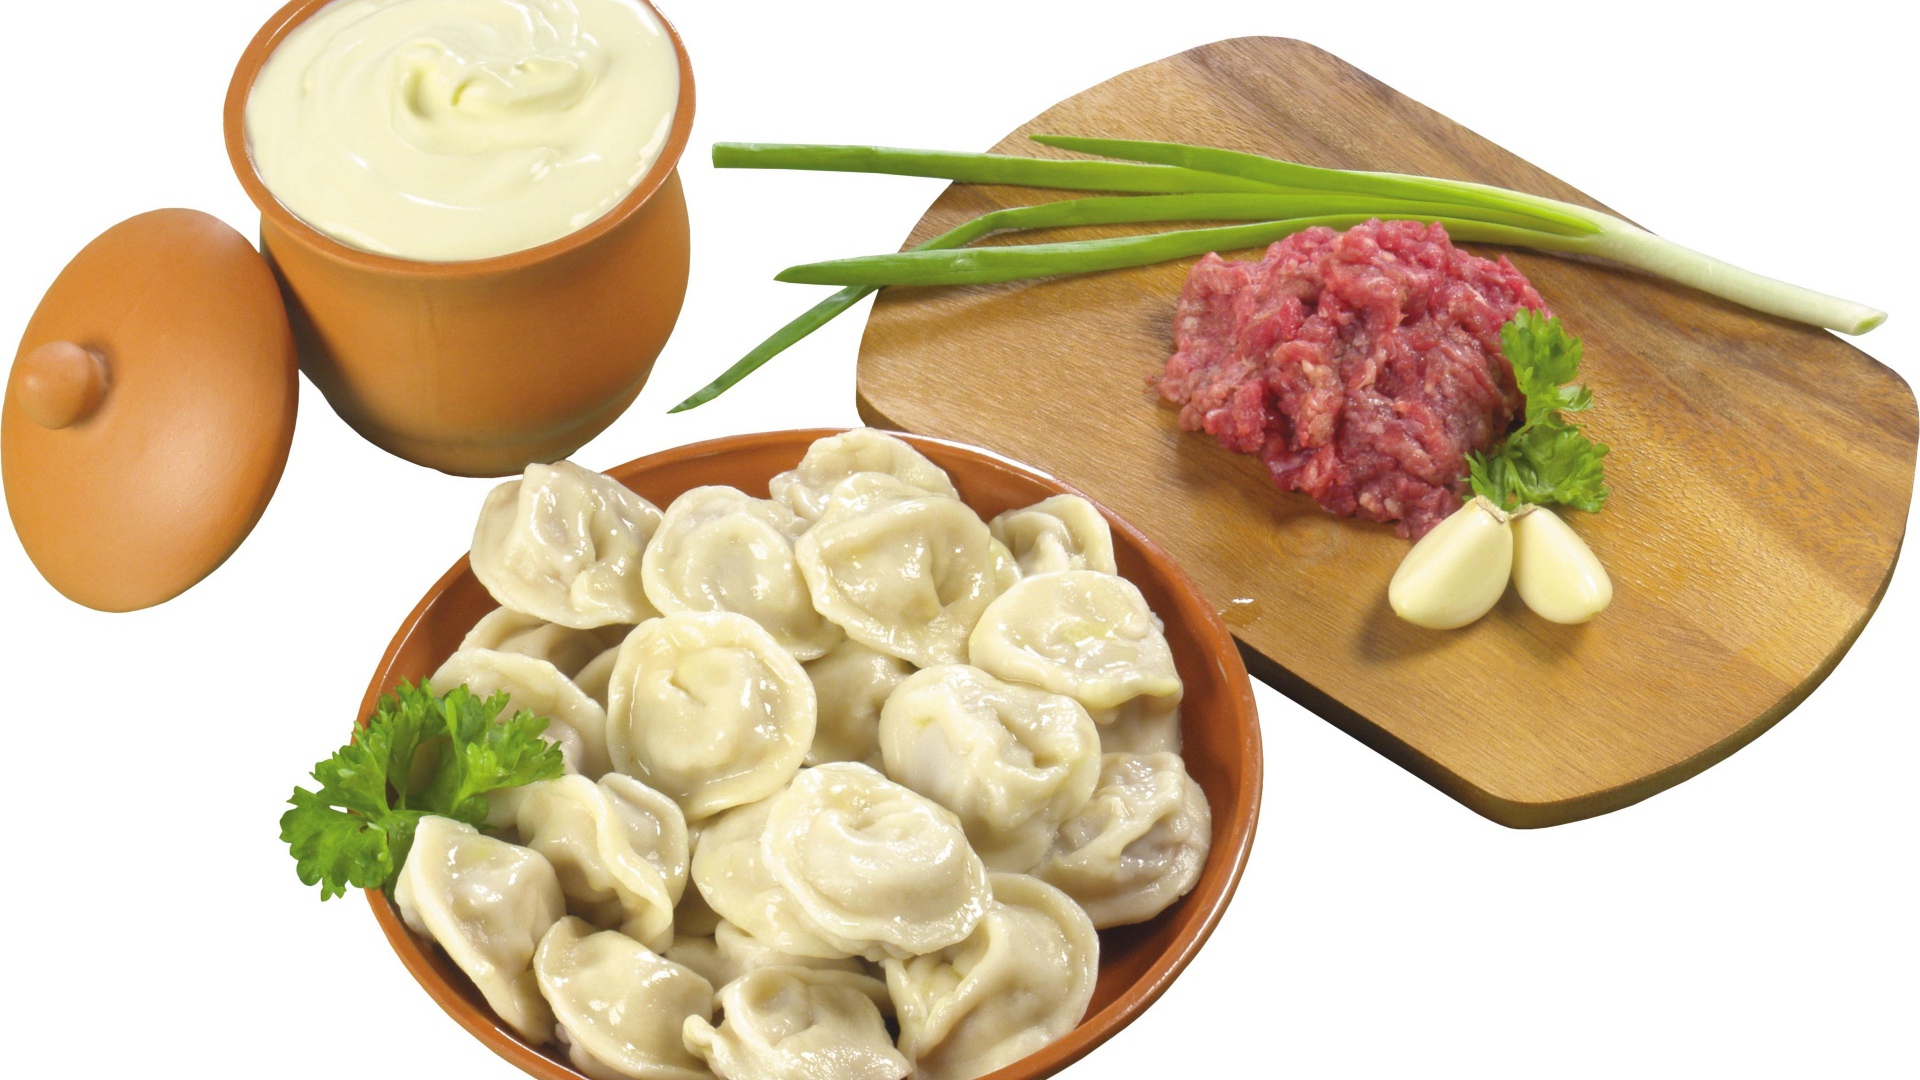 Boiled dumplings on the table with minced meat, sour cream and green onions